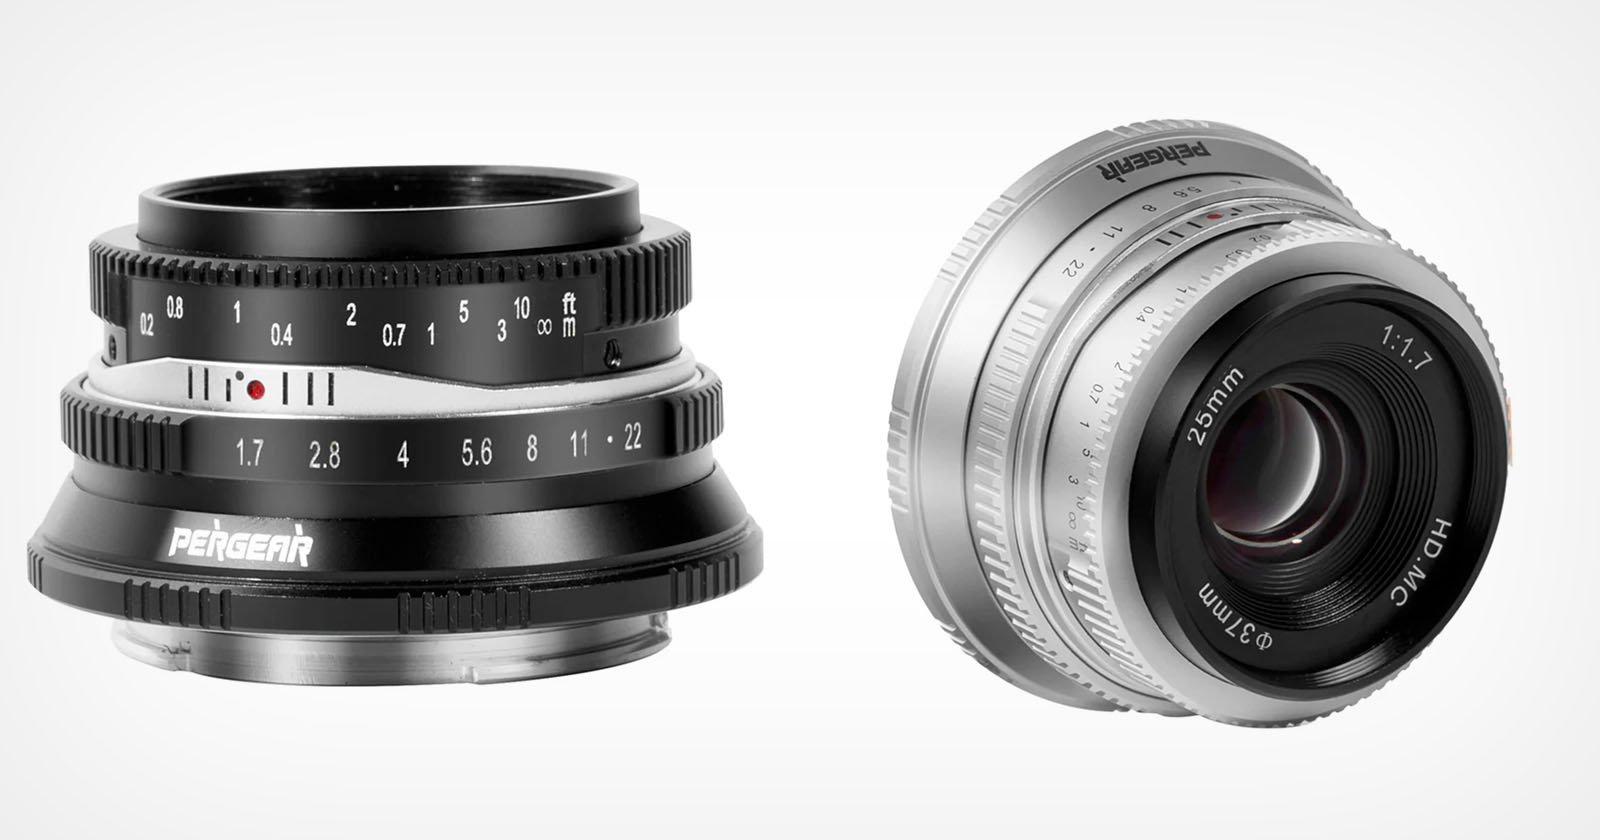  pergear 25mm aps-c lens costs available now 